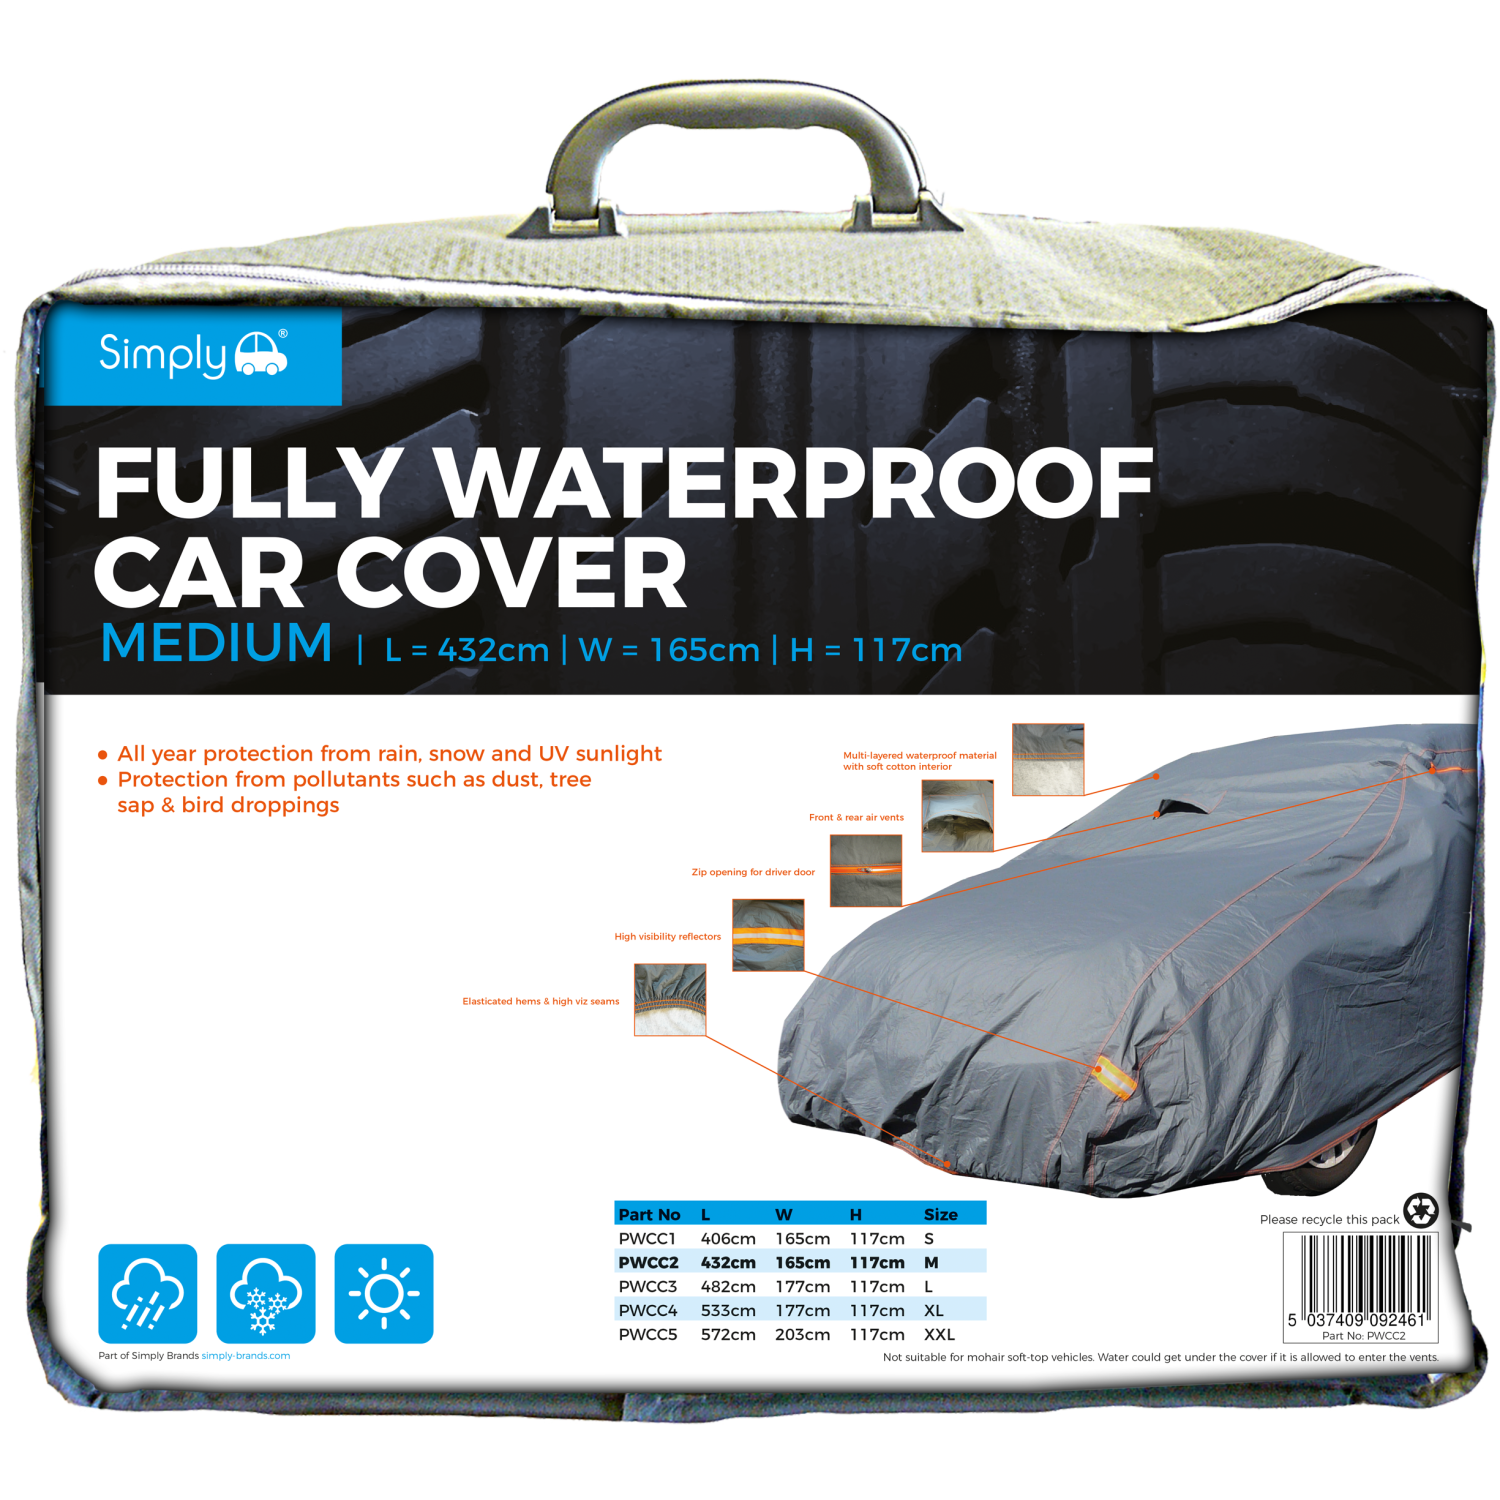 Simply Auto 'M' FULLY WATERPROOF CAR COVER - PWCC2